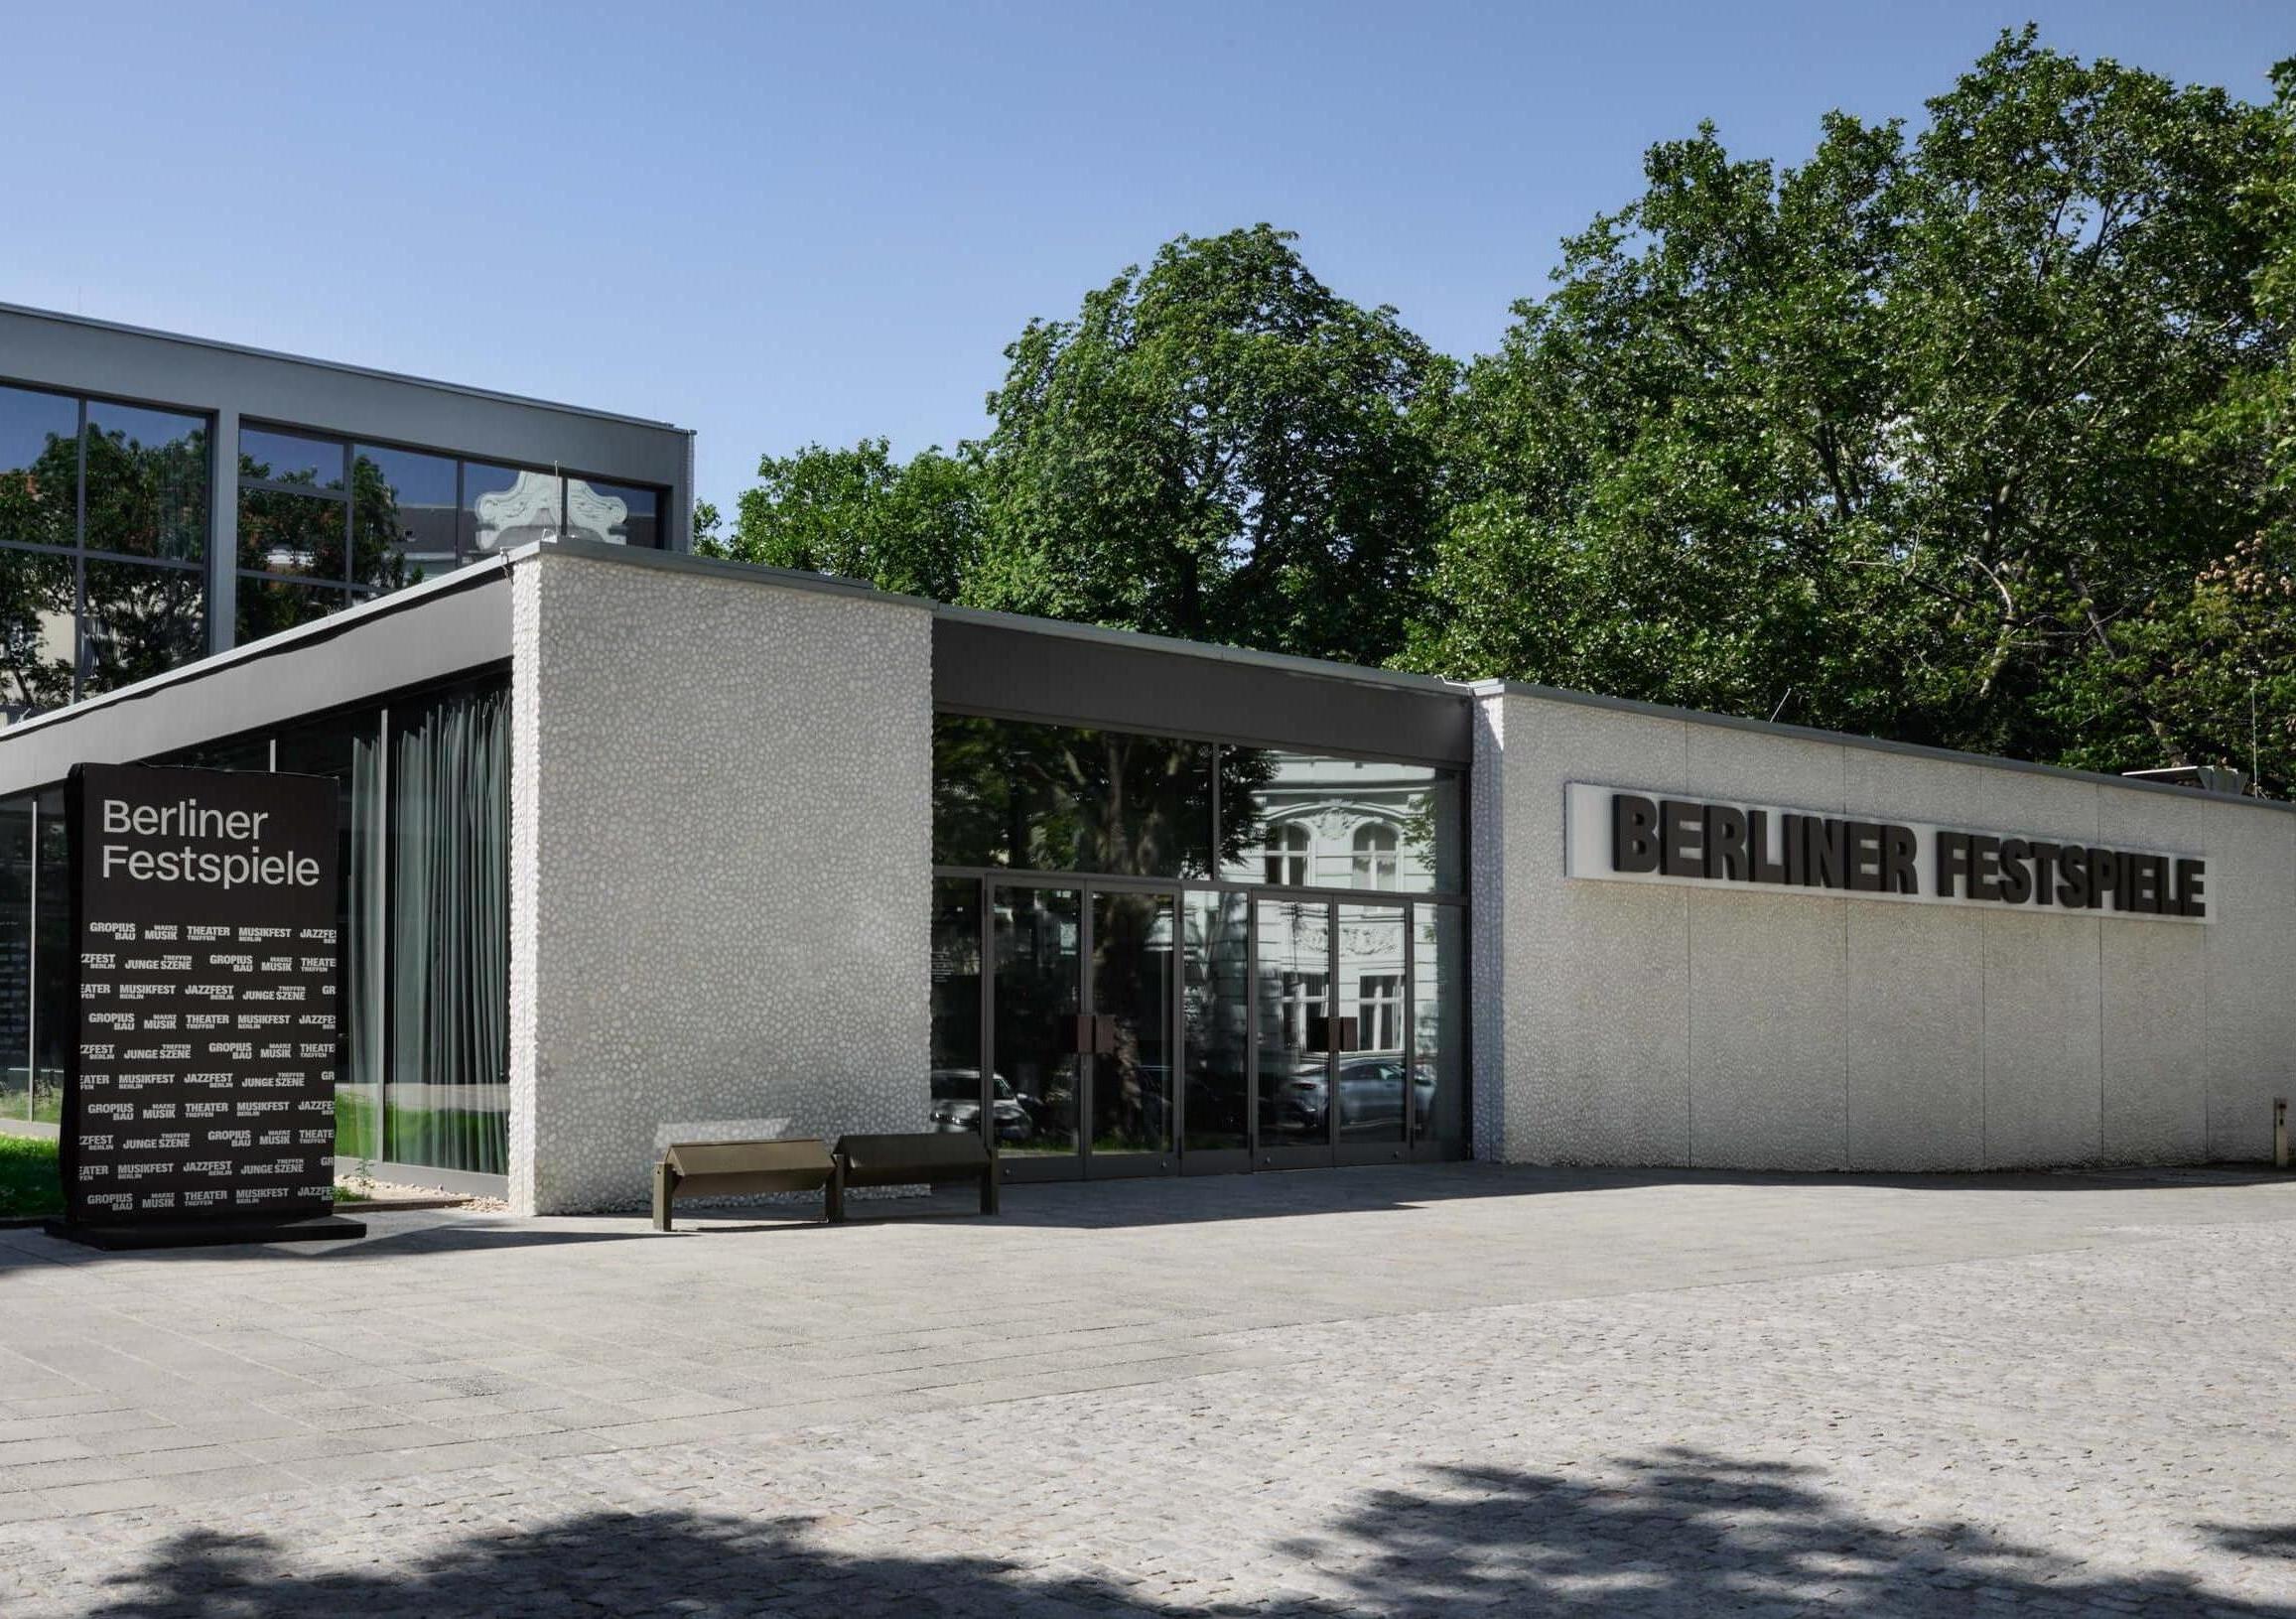 Frontal view of the Haus der Berliner Festspiele. The white building of the box office hall with the lettering "Berliner Festspiele" and the large glass façade of the front building can be seen.